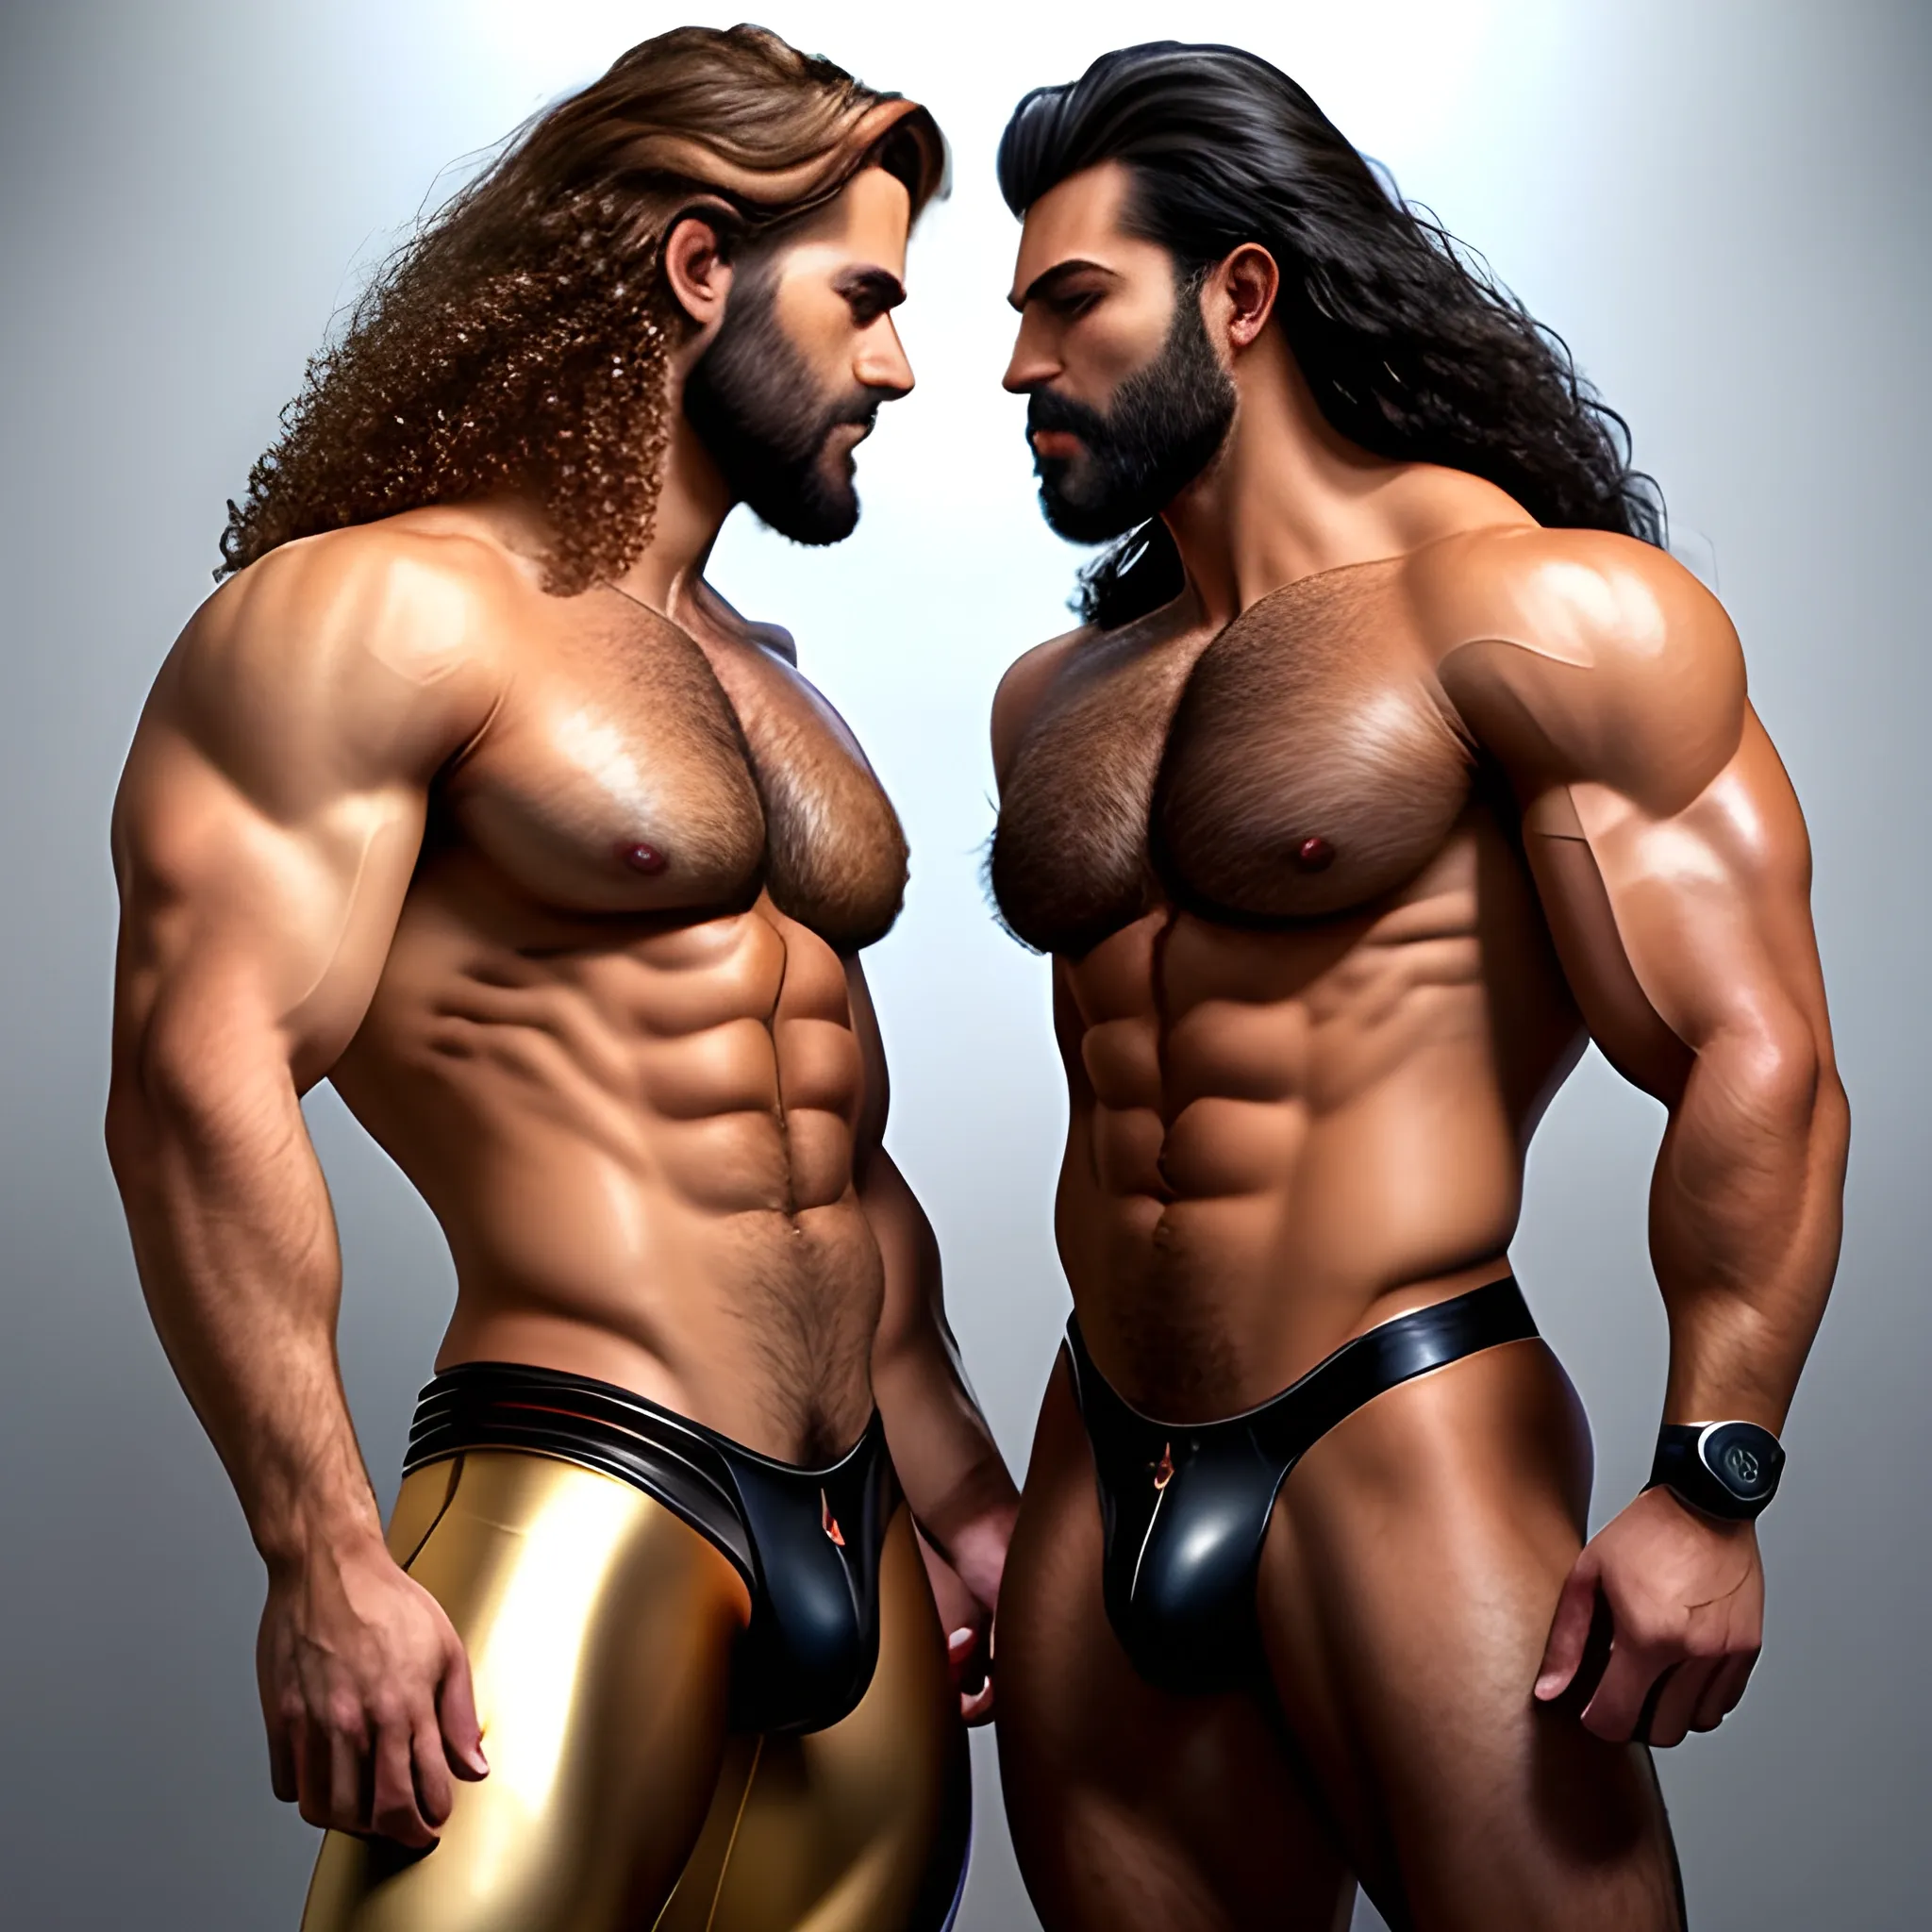 2 muscularDude's,kissing,
 with expansive Wings and different hairstyle,handsome,beauty's,muscle, no blurry,dark eyes,hyperealistic ,german, tanned skin,long curly hair,colorful hair,colorfull small leather tanga with gold details,same facial halves, bulge ,happy,whole body with legs,big bulge,dark piercing eyes,huge bulge,hairy,fine details, young,two identical symmetrical eyes,same colofull eyes, stubble ,blond,very long hair cascading over a hairy Chest,reminiscent of an Angel